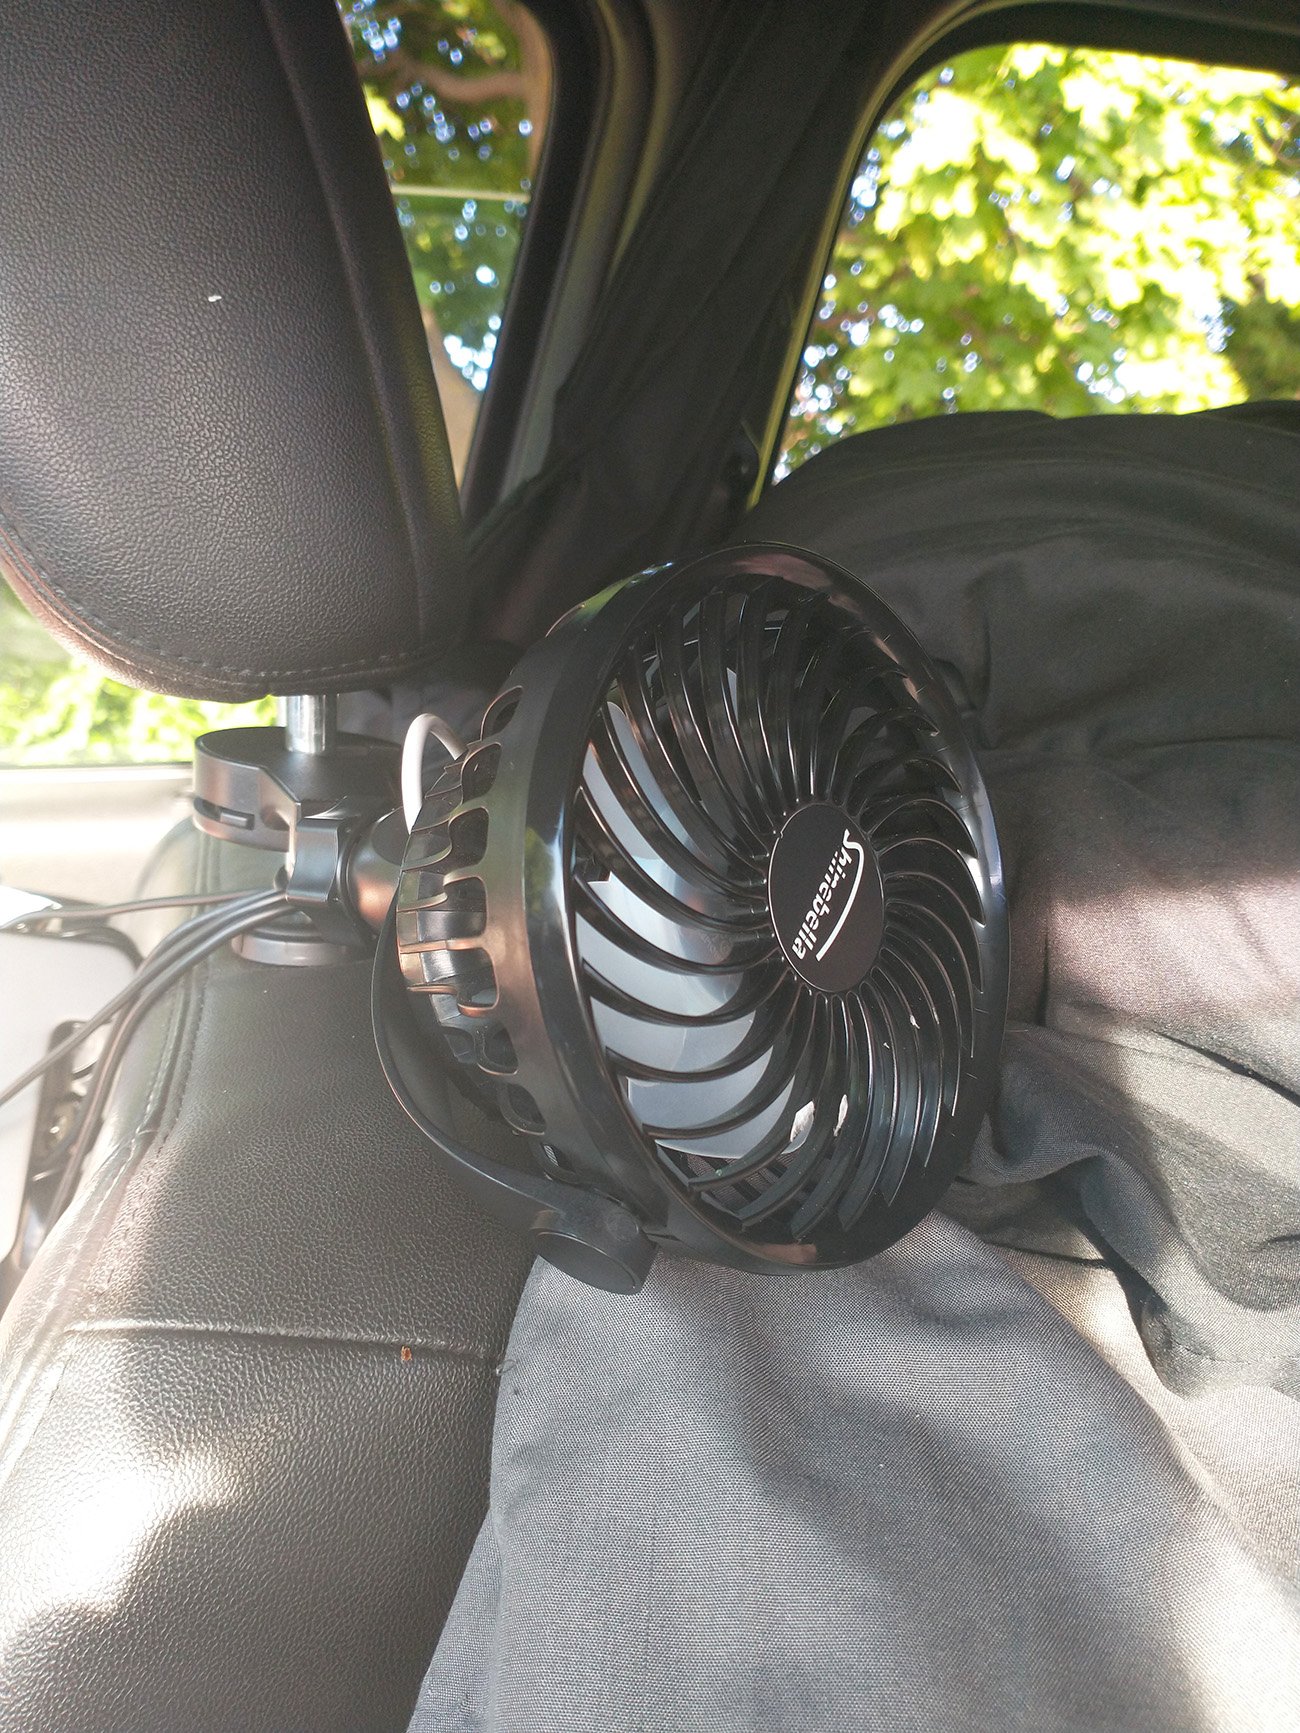 MVP USB fan here. Should have gotten a larger one, or maybe a second one. Really helps you fall asleep in that period where your body warms the car faster then the night air cools it.